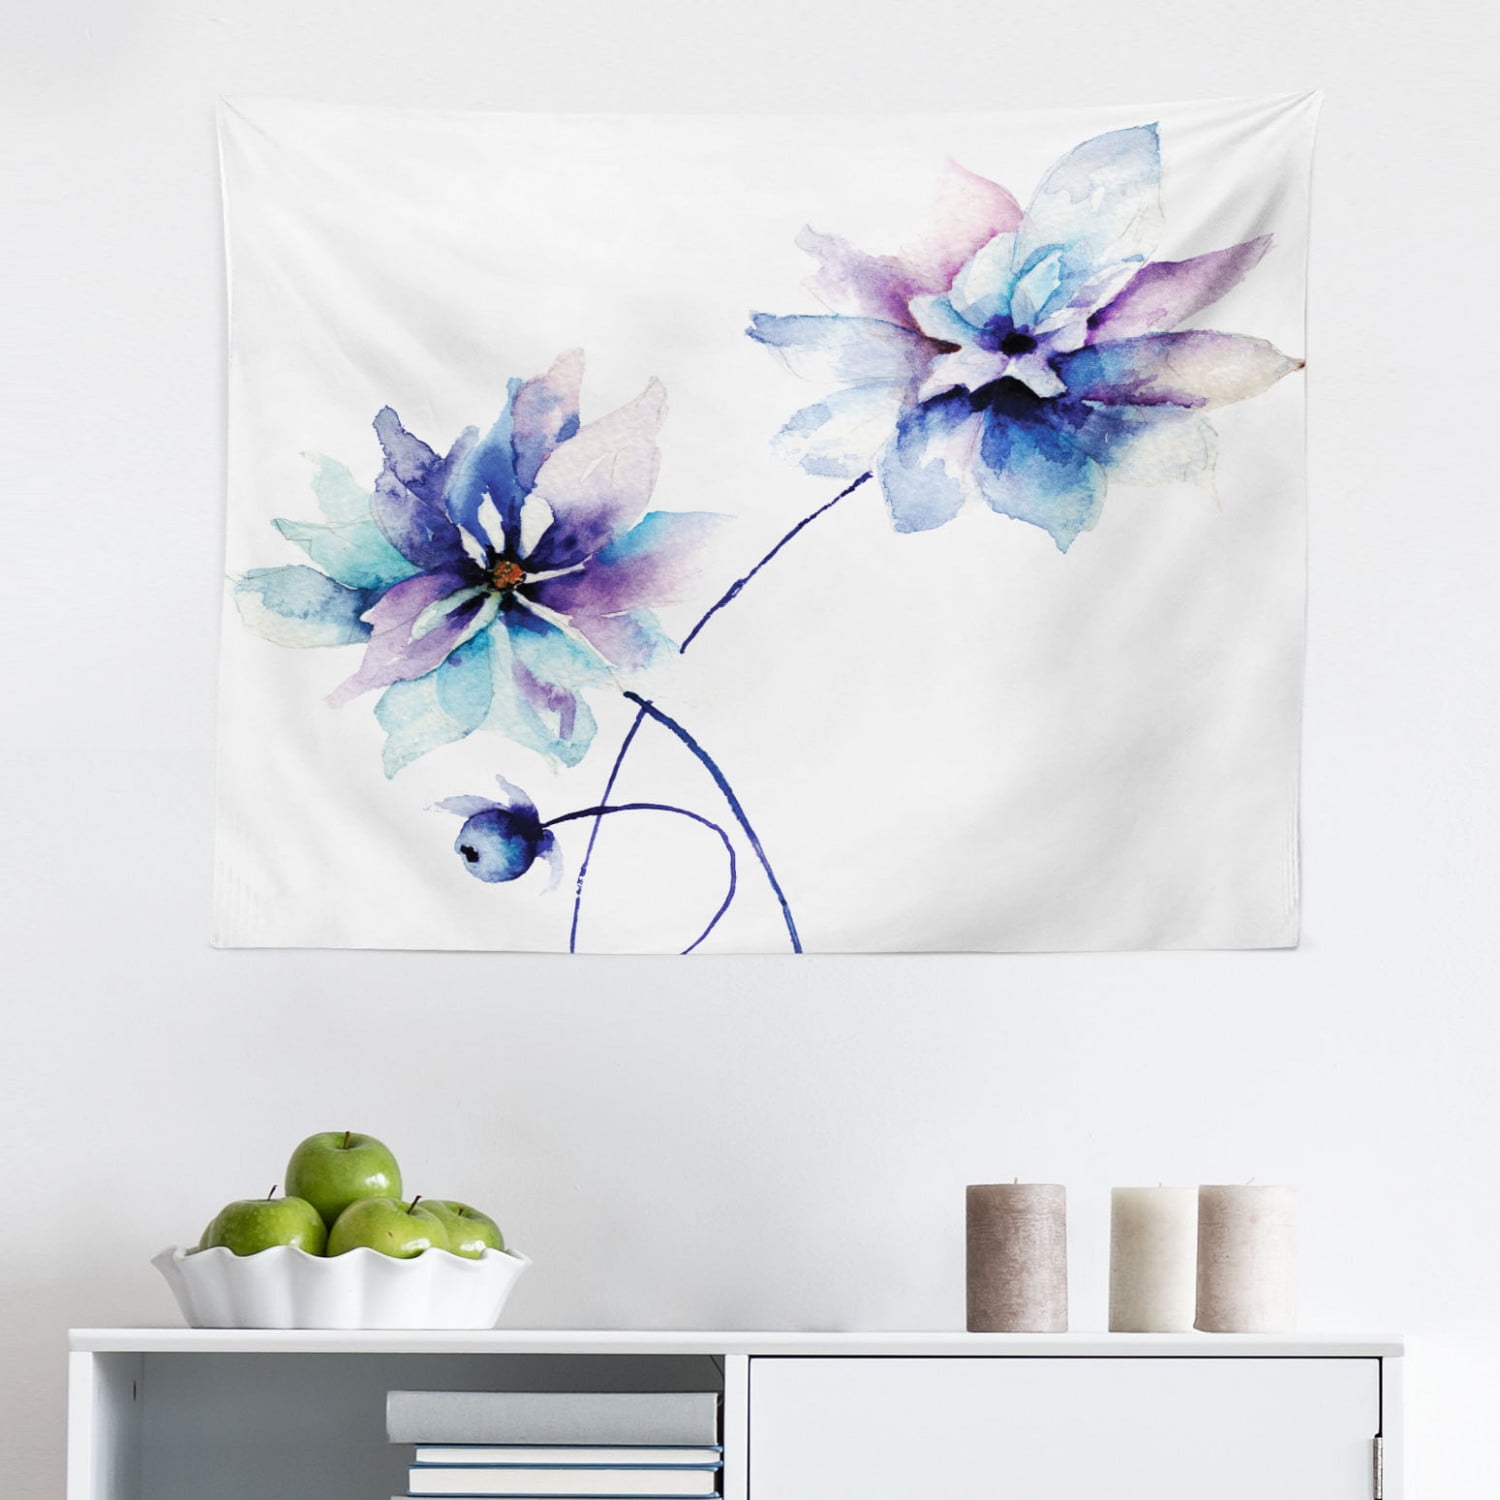 Ambesonne Watercolor Flower Tapestry, Spring Flora Pattern Print Painting Effect Country Style Art, Fabric Wall Hanging Decor for Bedroom Living Room Dorm, 2